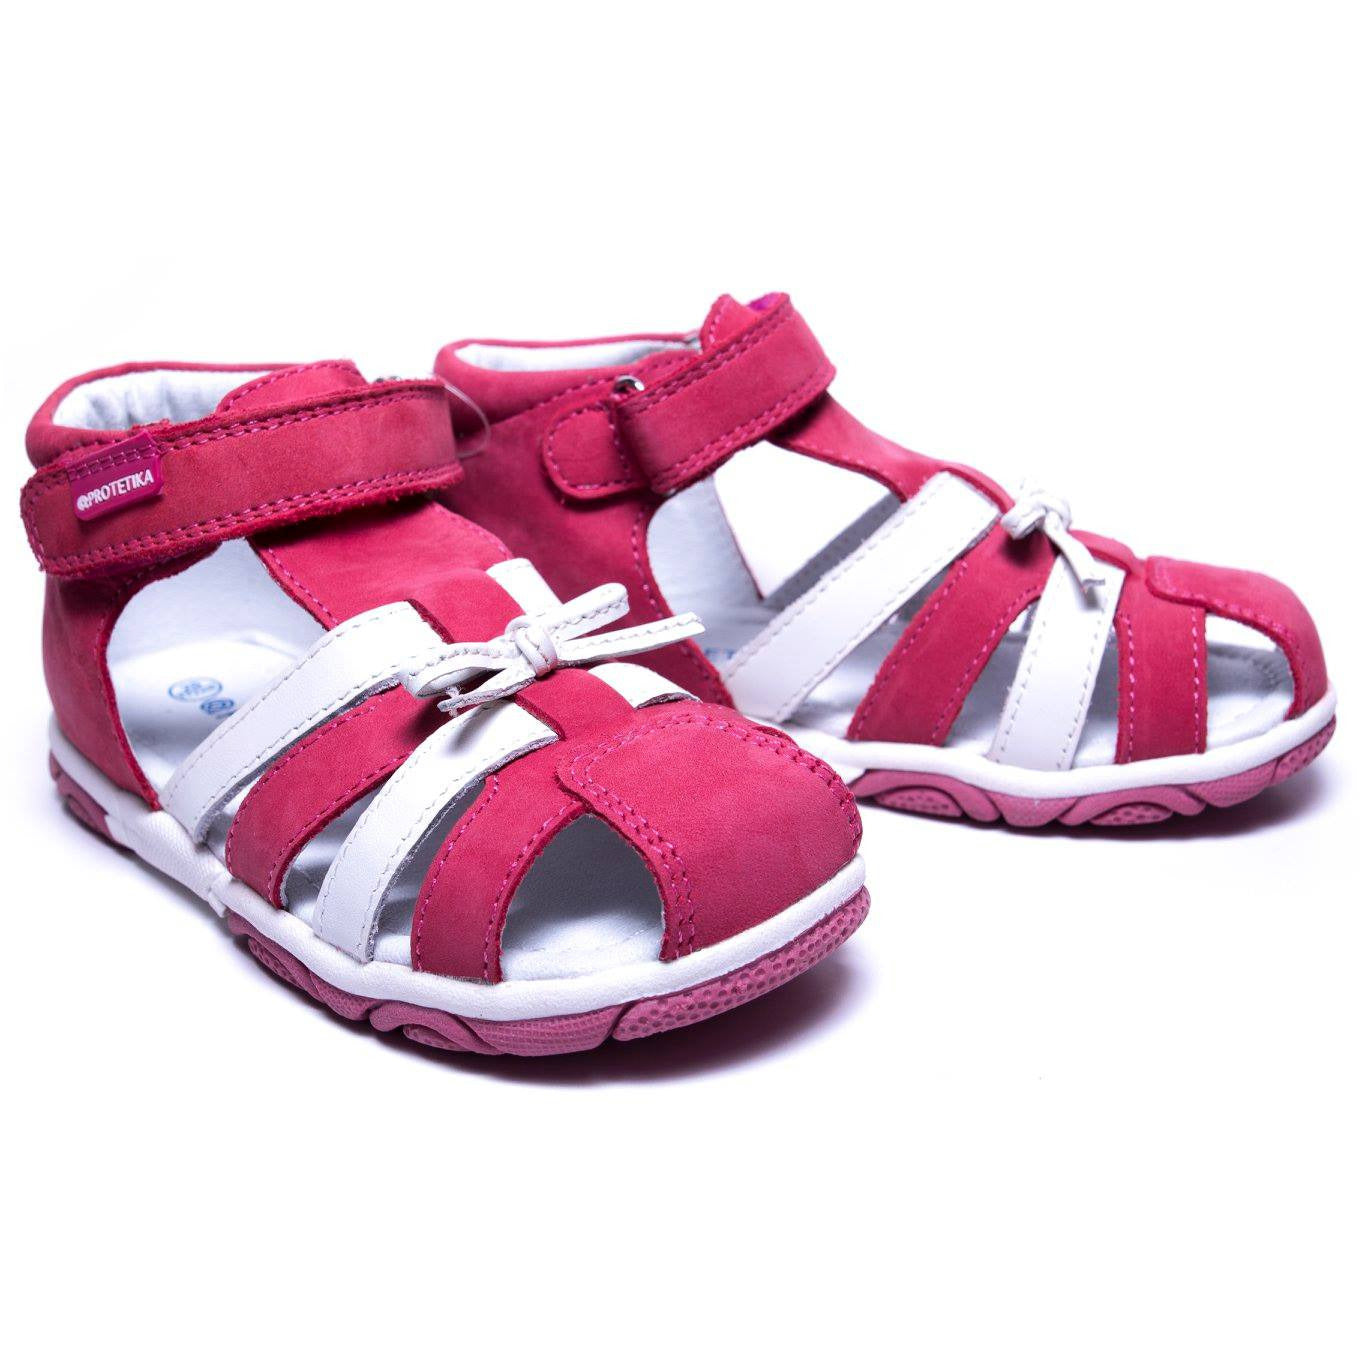 Red white sandals for toddler girls are anatomically shaped, and they support their foot arch and heel straight positioning.